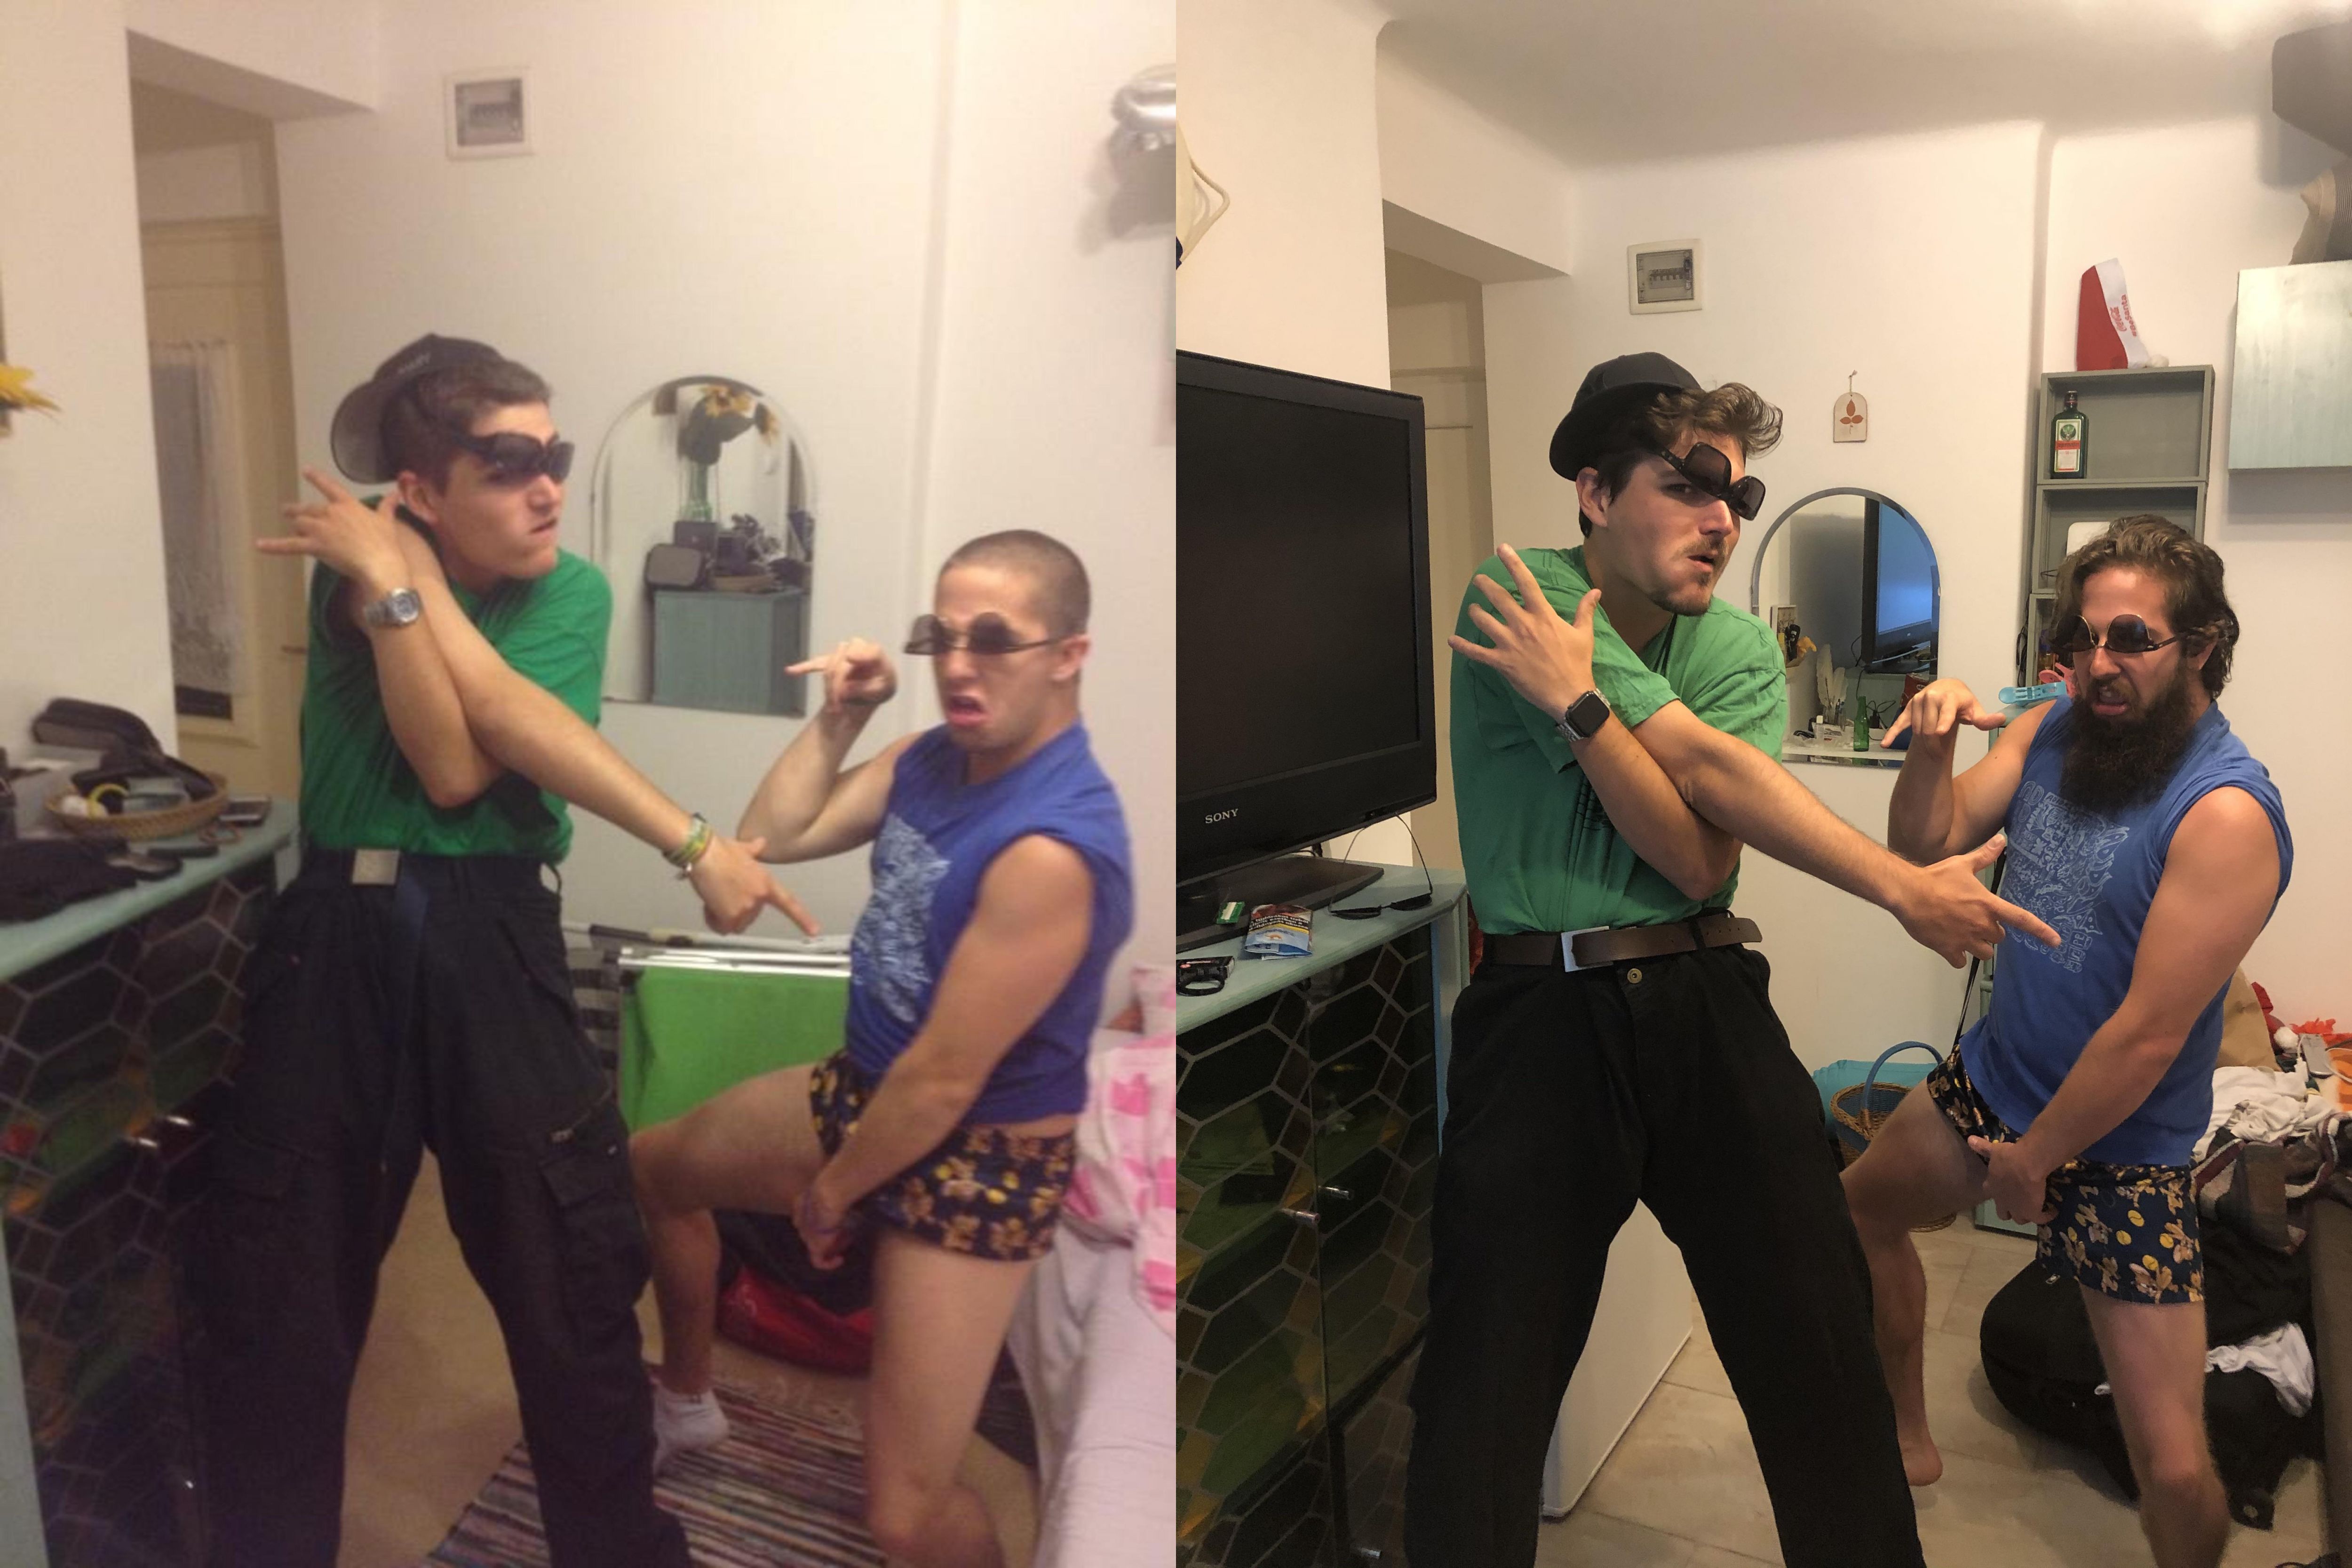 So we recreated our favourite picture from 8 years and some kgs ago.